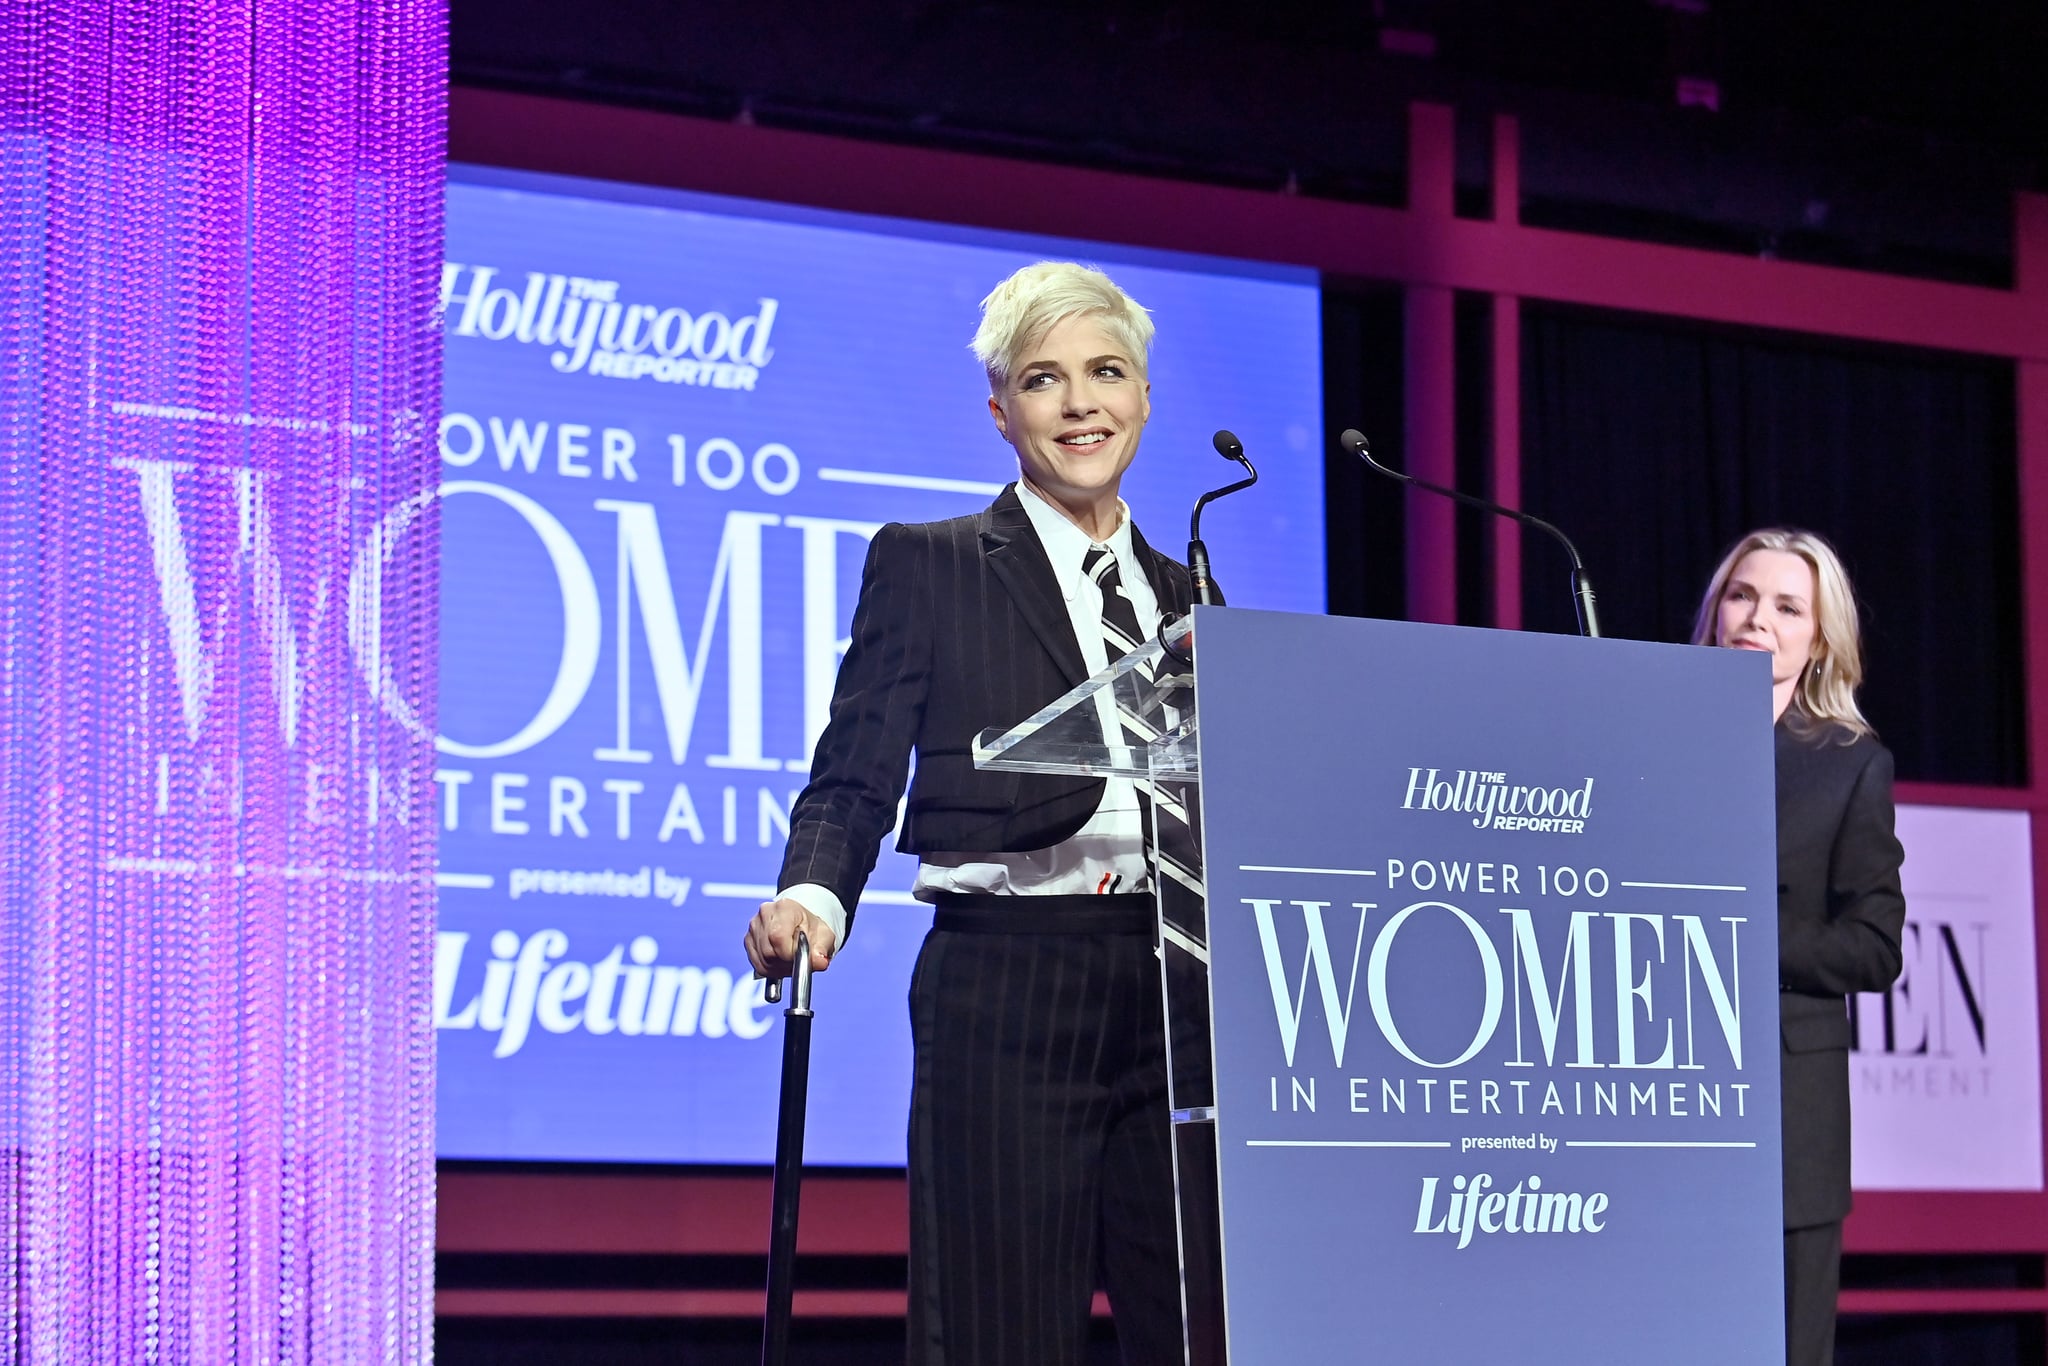 LOS ANGELES, CALIFORNIA - DECEMBER 08: Honouree Selma Blair accepts the Equity in Entertainment Award onstage during The Hollywood Reporter 2021 Power 100 Women in Entertainment, presented by Lifetime at Fairmont Century Plaza on December 08, 2021 in Los Angeles, California. (Photo by Stefanie Keenan/Getty Images for The Hollywood Reporter)